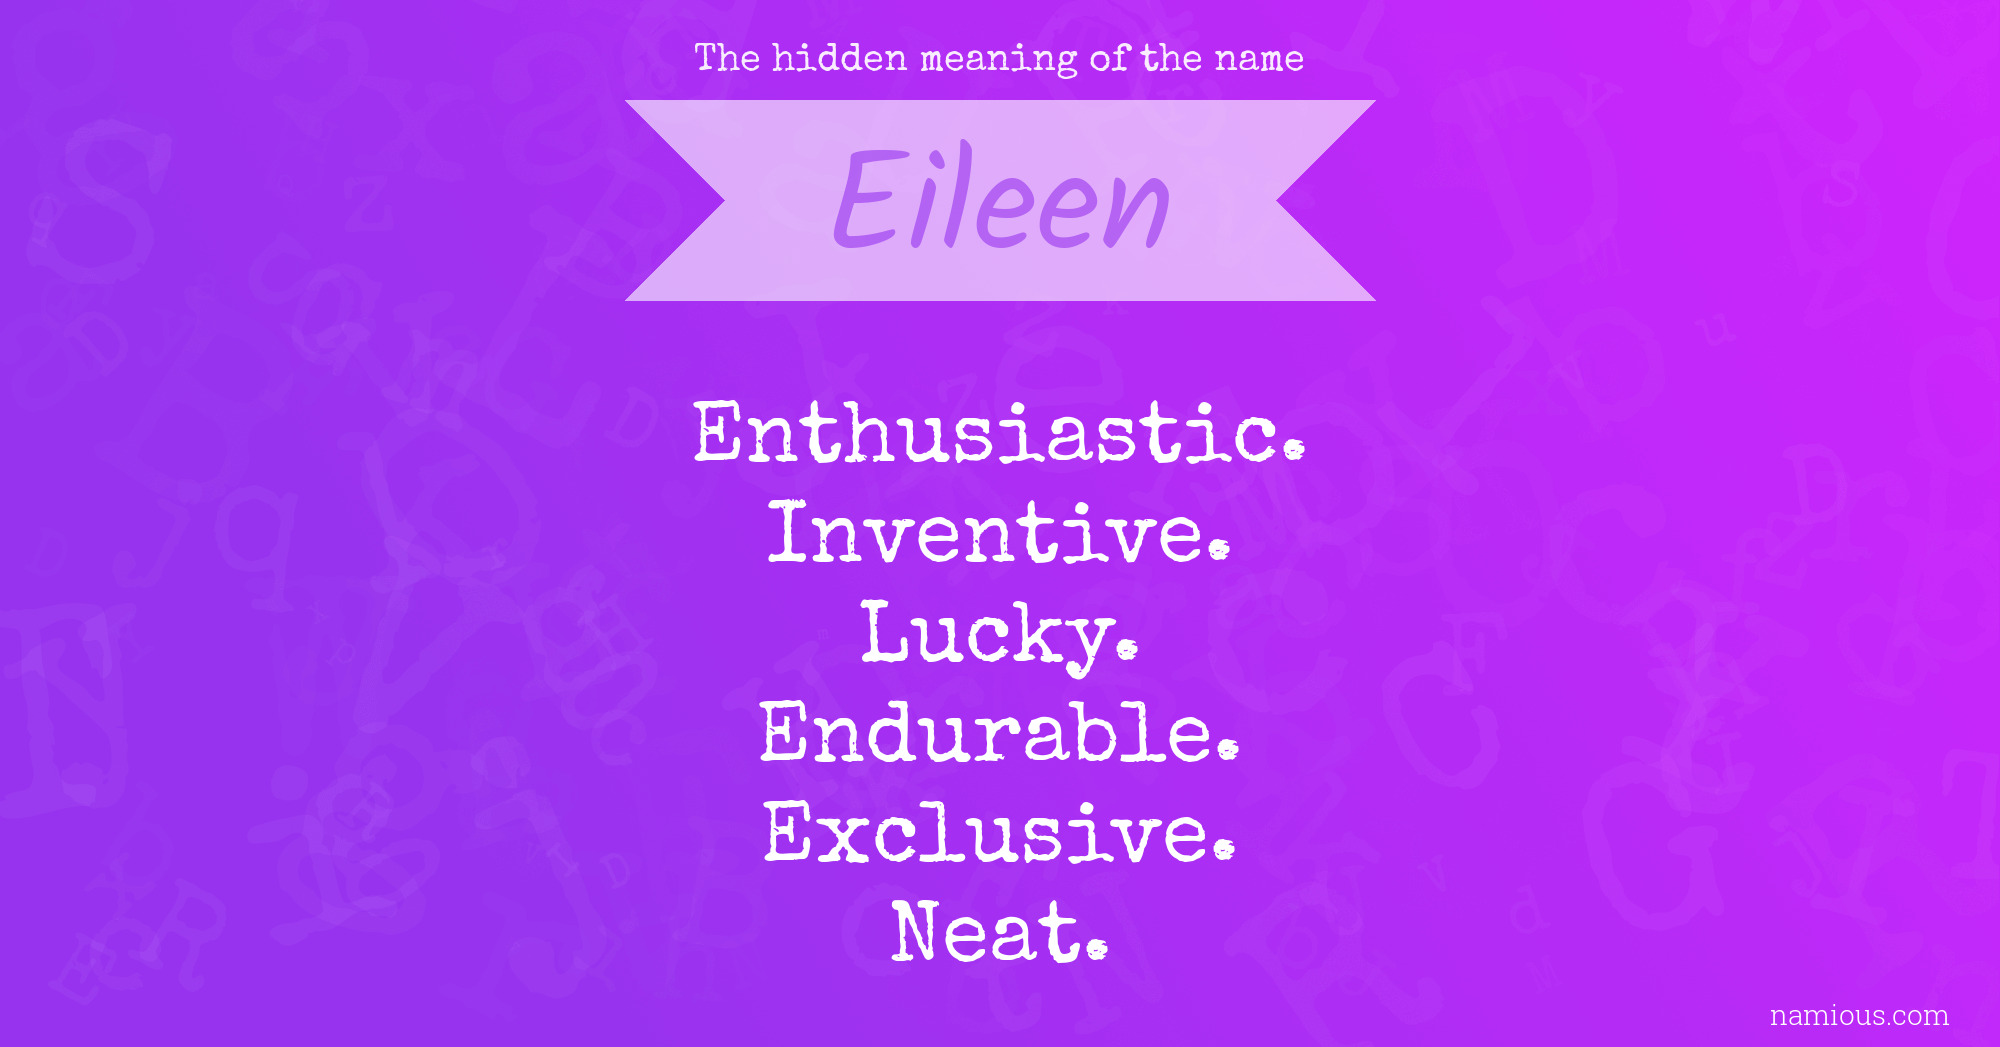 The hidden meaning of the name Eileen